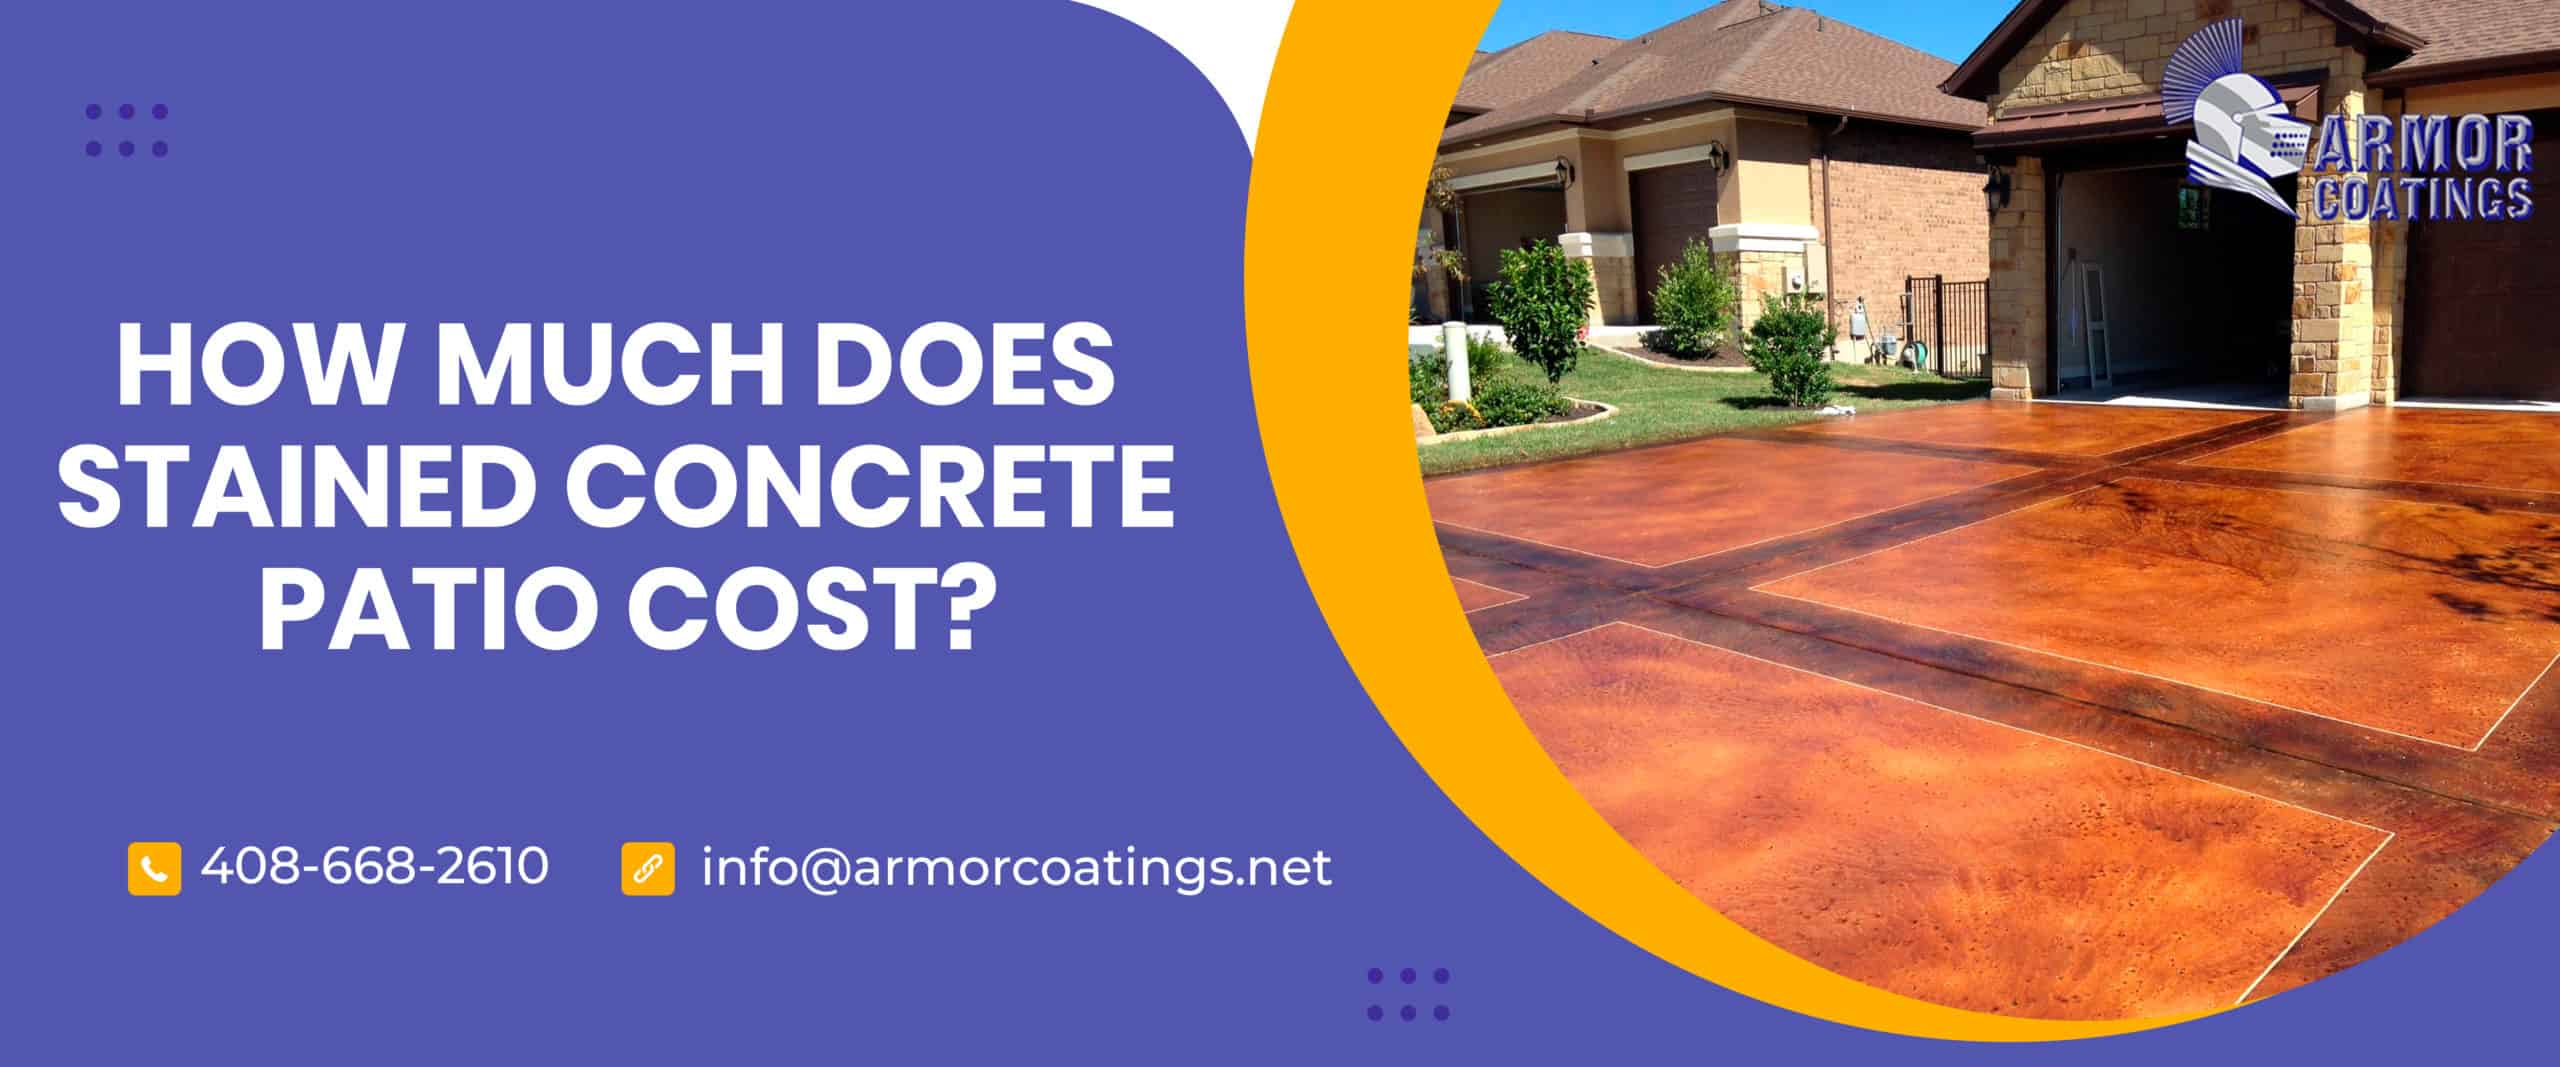 stained concrete cost